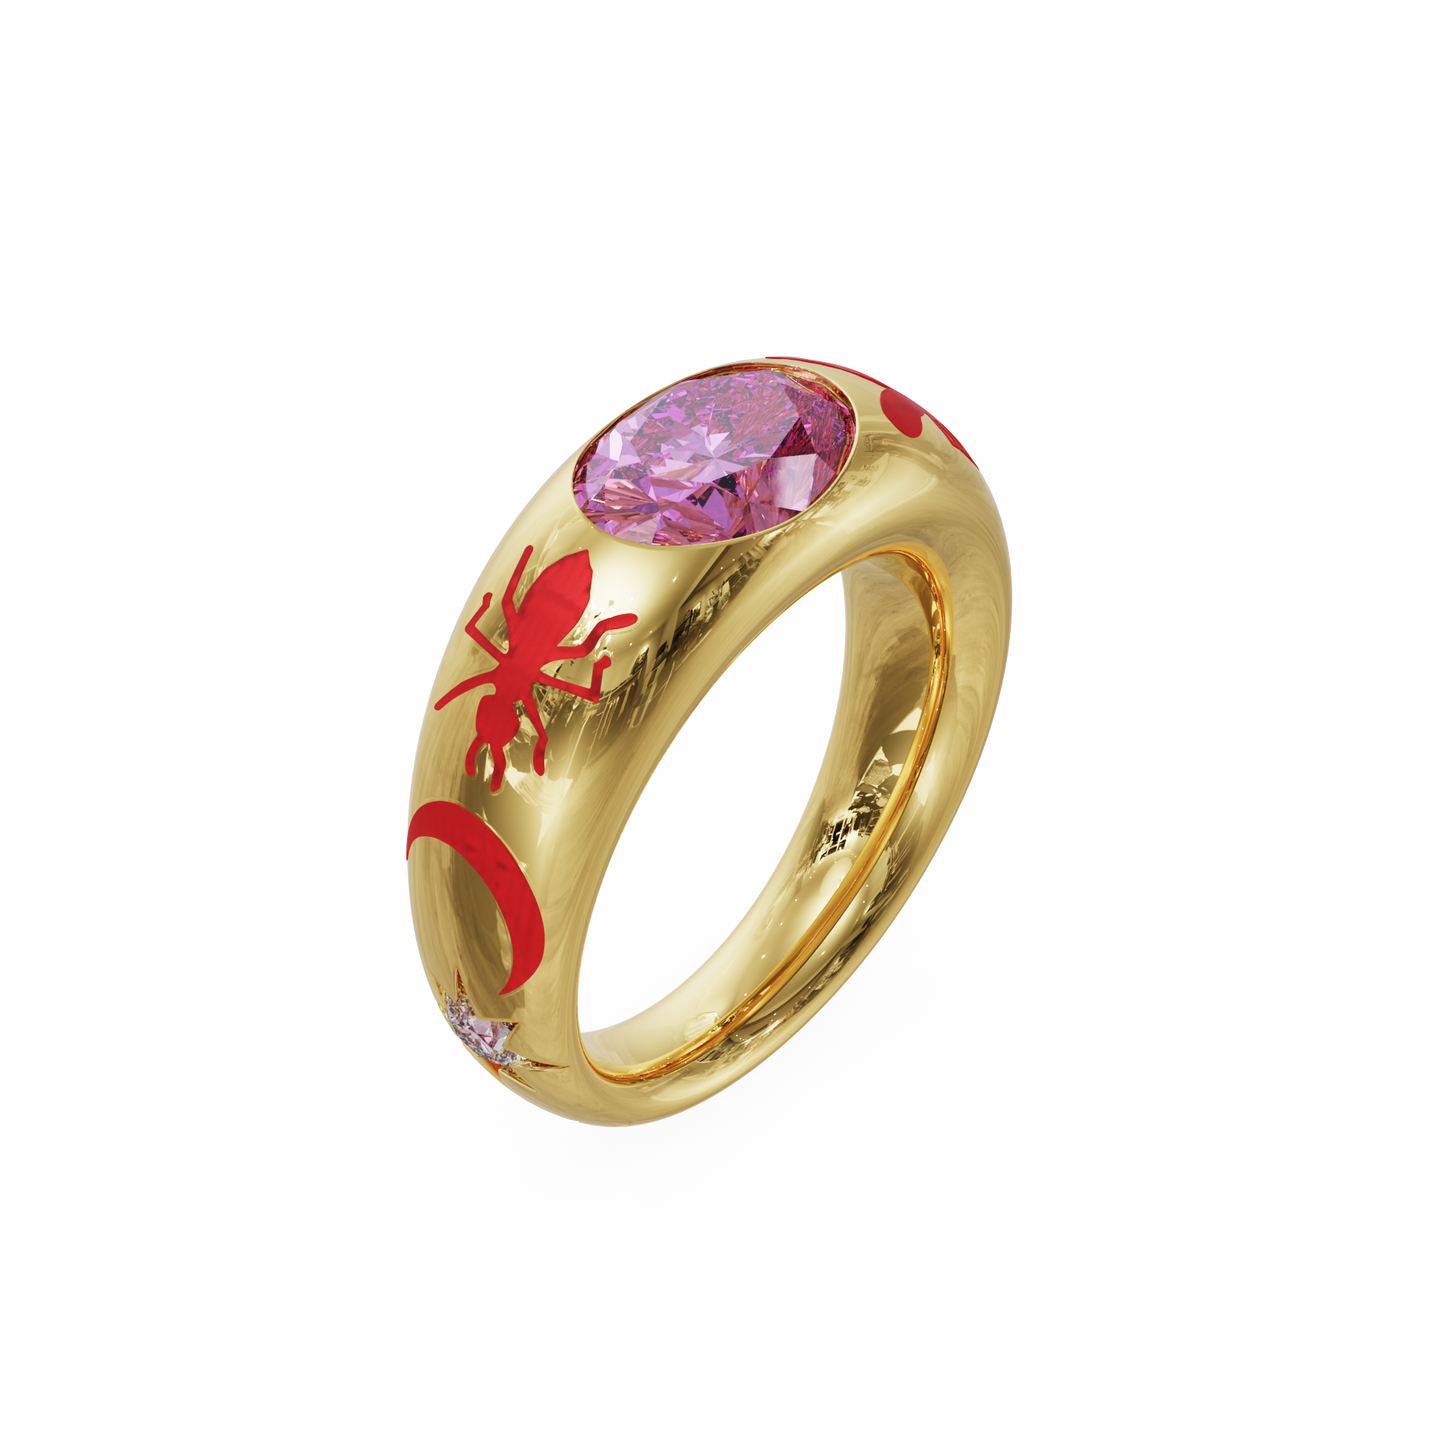 Load image into Gallery viewer, Dyne x The Seven 18K Yellow Gold Bombe Ring with Pink Tourmaline, Diamonds, and Vitreous Enamel
